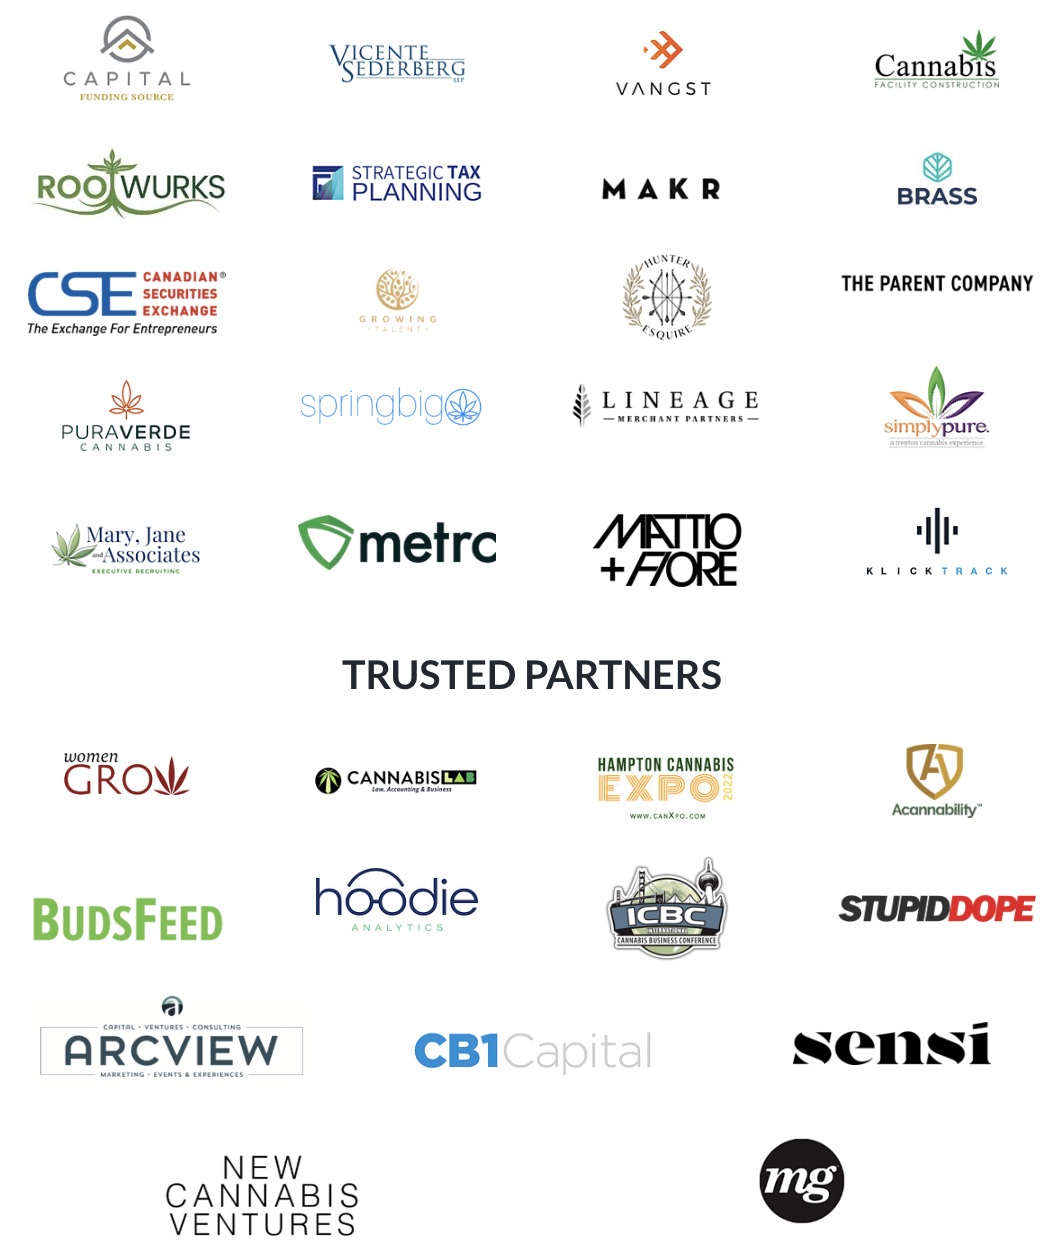 Participating Companies & Trusted Partners